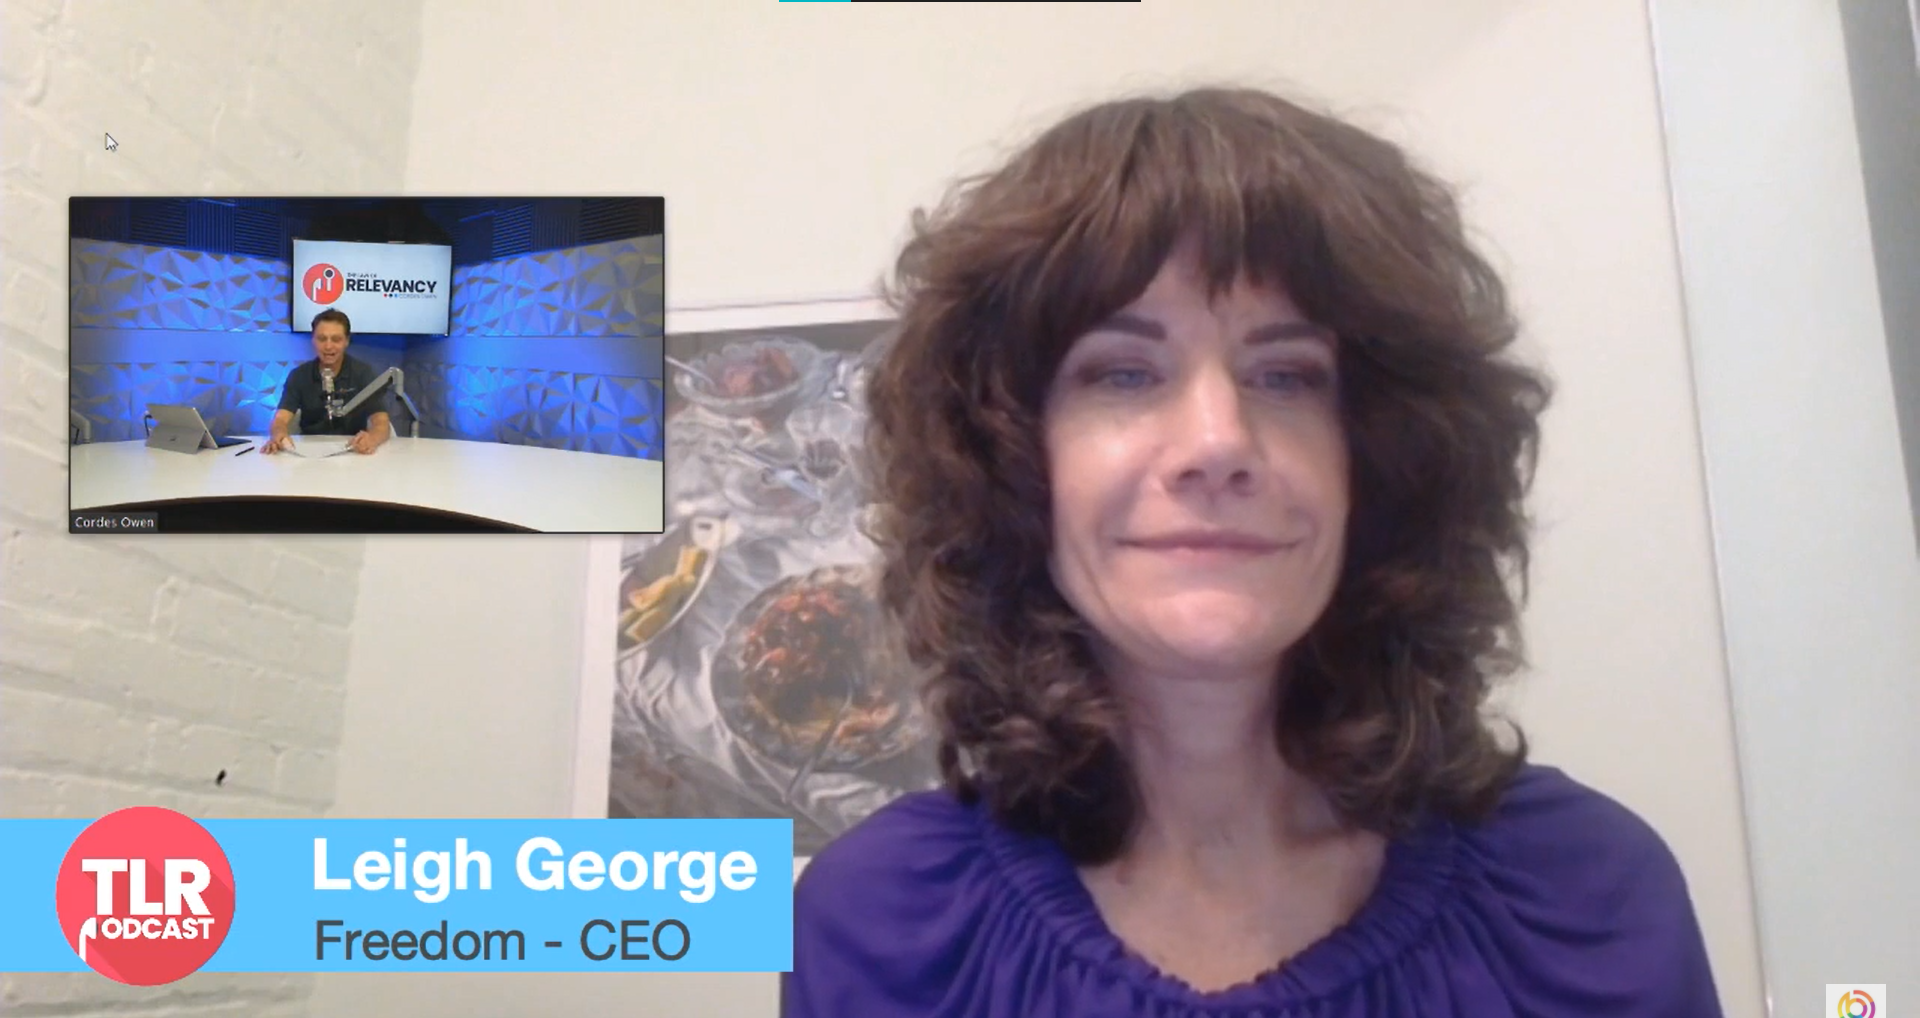 The Law of Relevancy with Leigh George